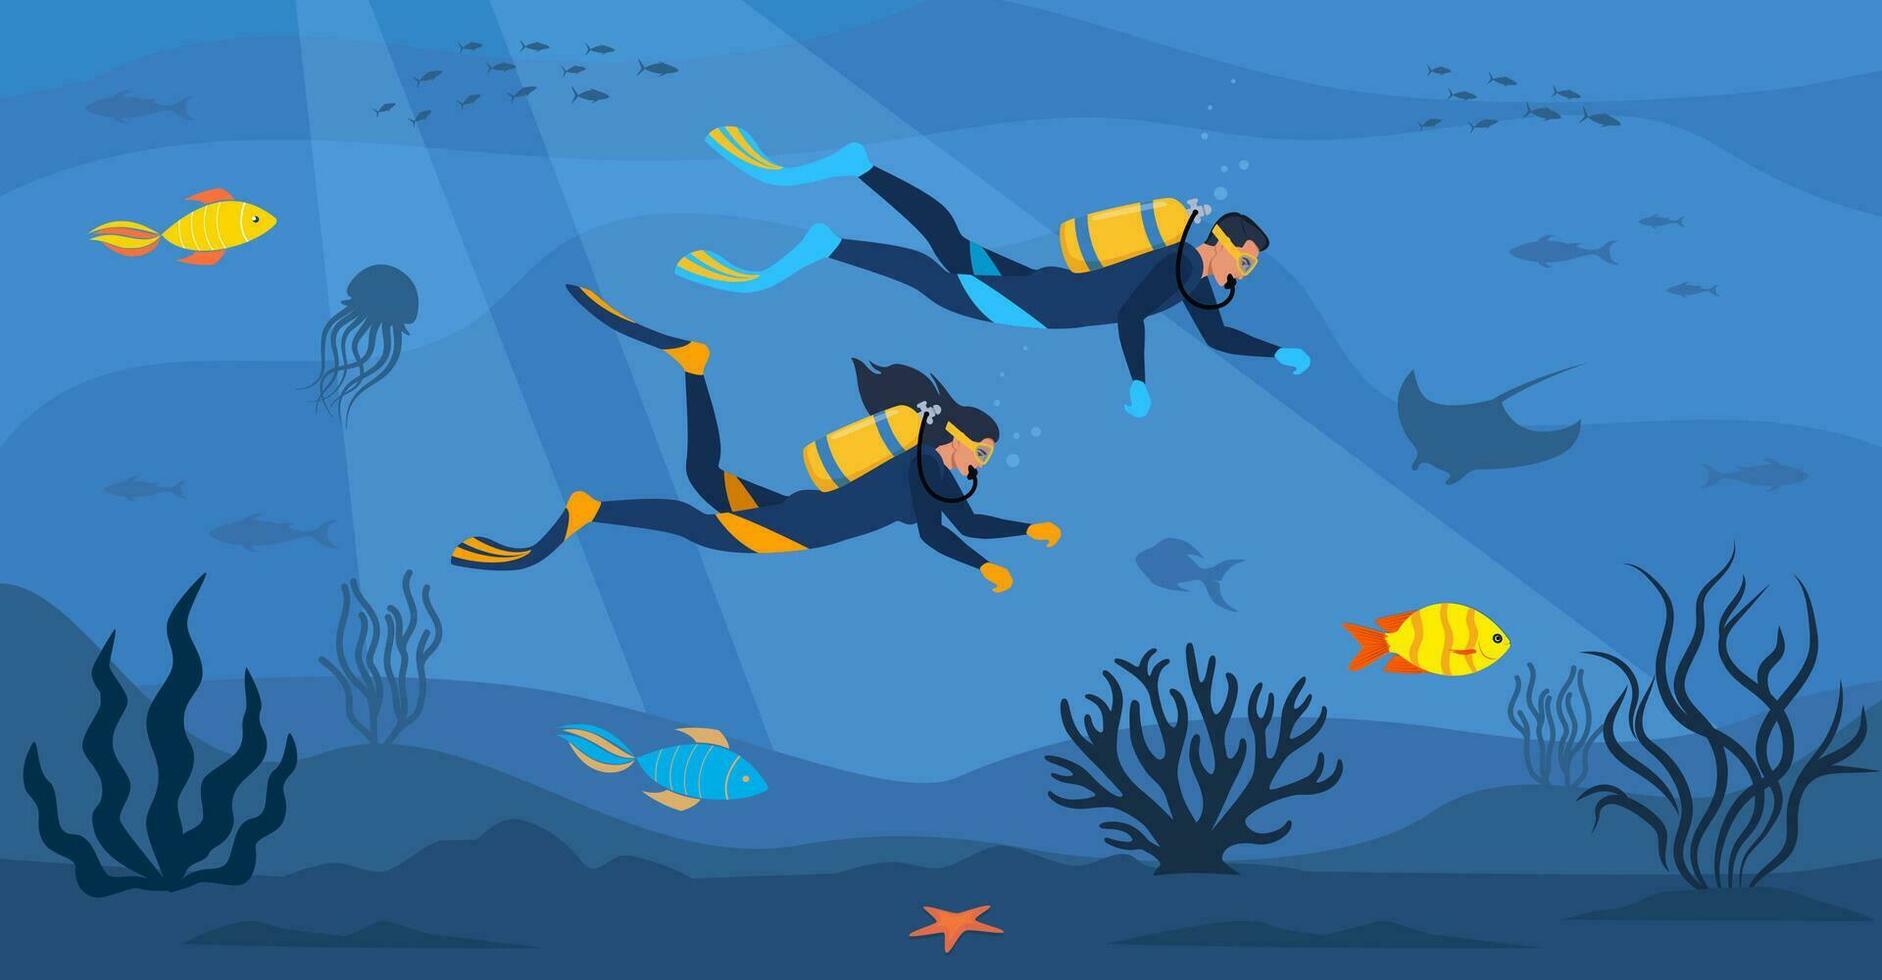 Divers with diving equipment swim in the sea. Seascape banner with people underwater. Characters wearing wetsuit with oxygen tanks and fins. Underwater world. Vector illustration.